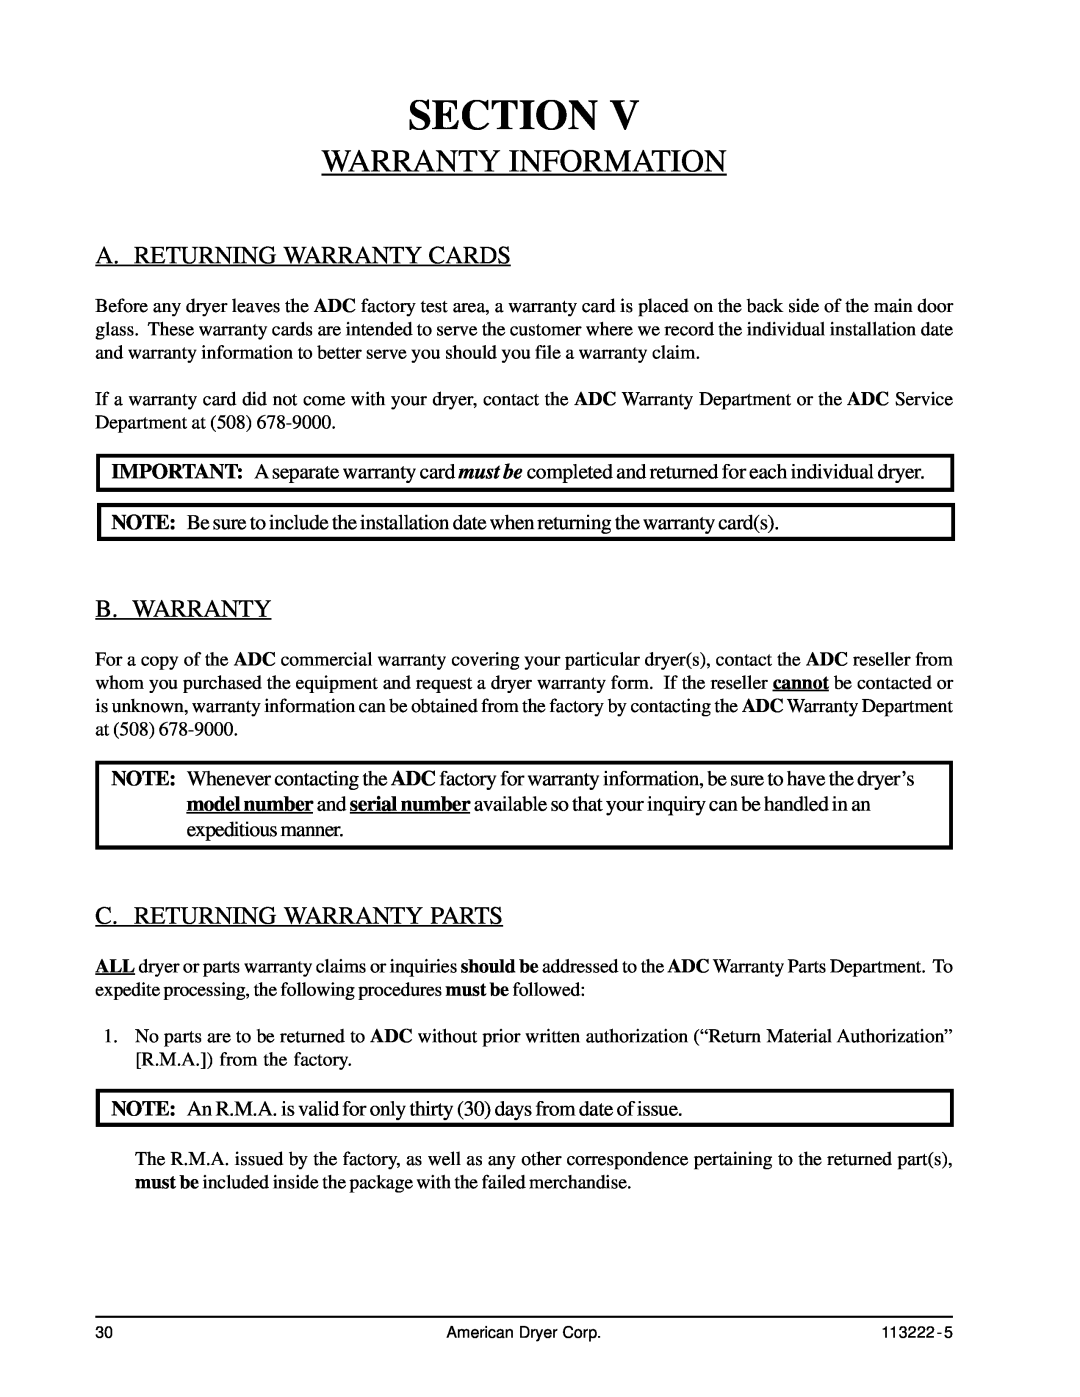 American Dryer Corp AD-24 Phase 7 Warranty Information, Section, A. Returning Warranty Cards, B. Warranty 